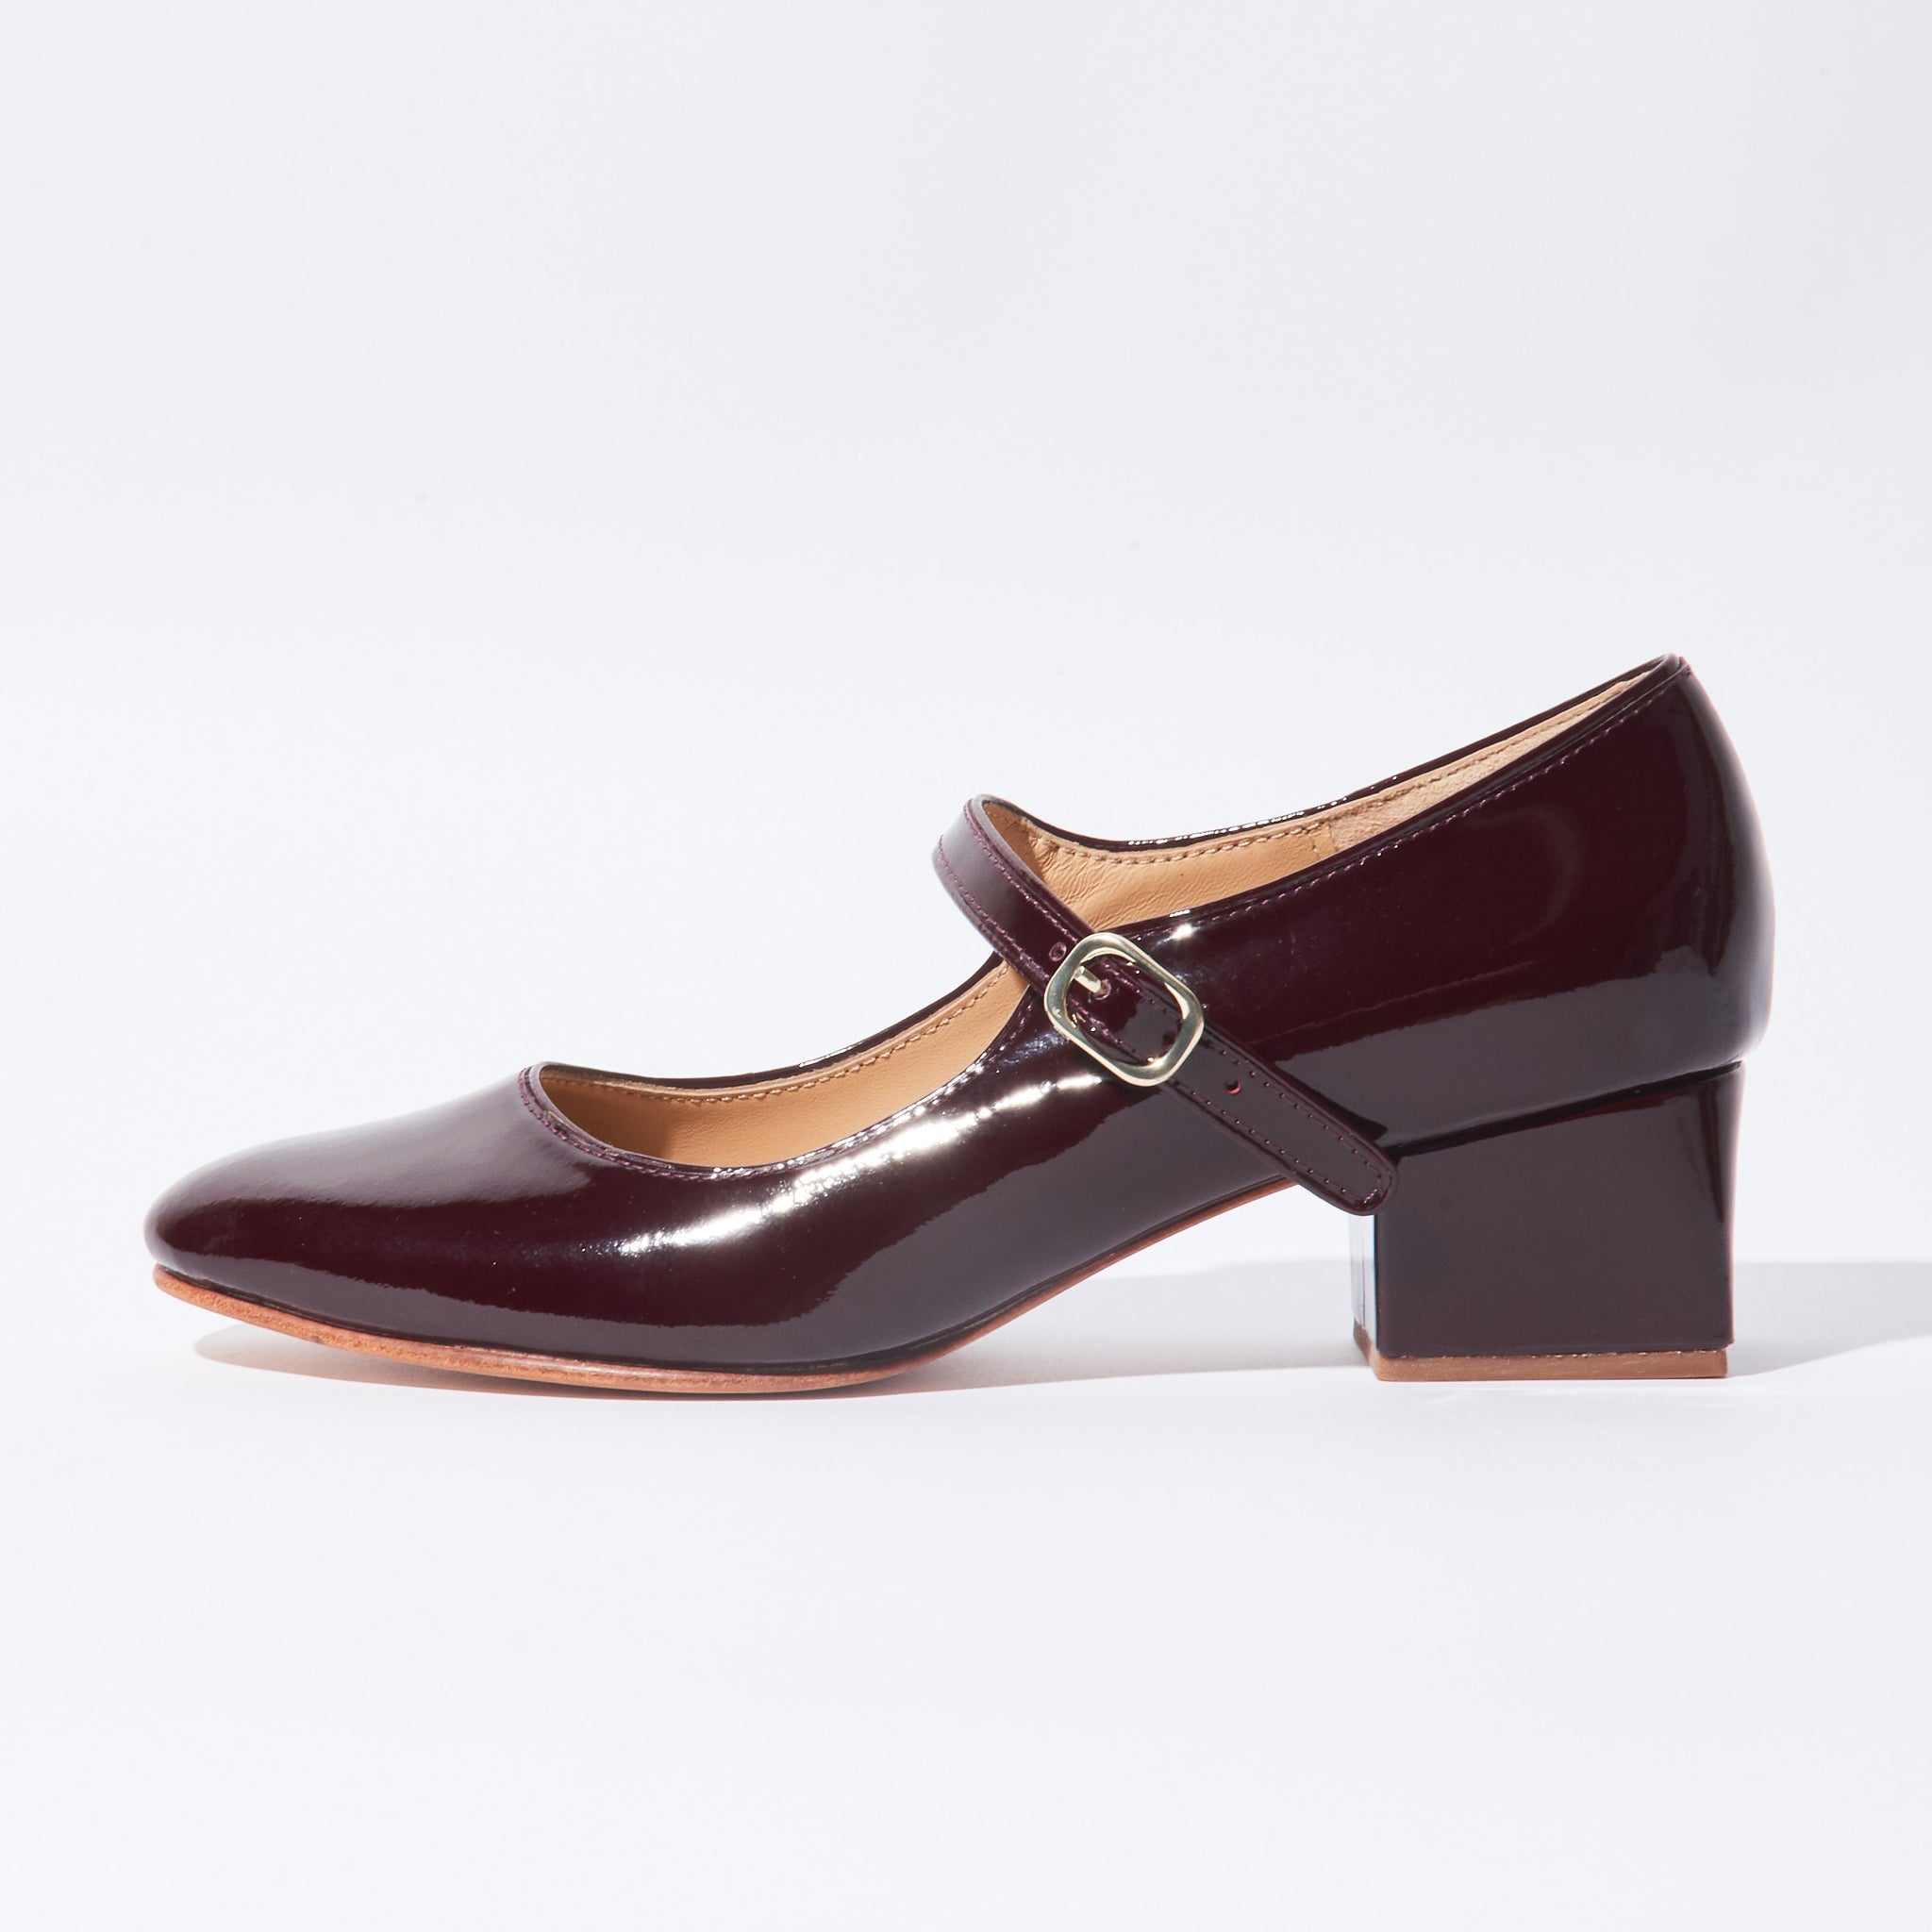 Women's Shoes – Frances May